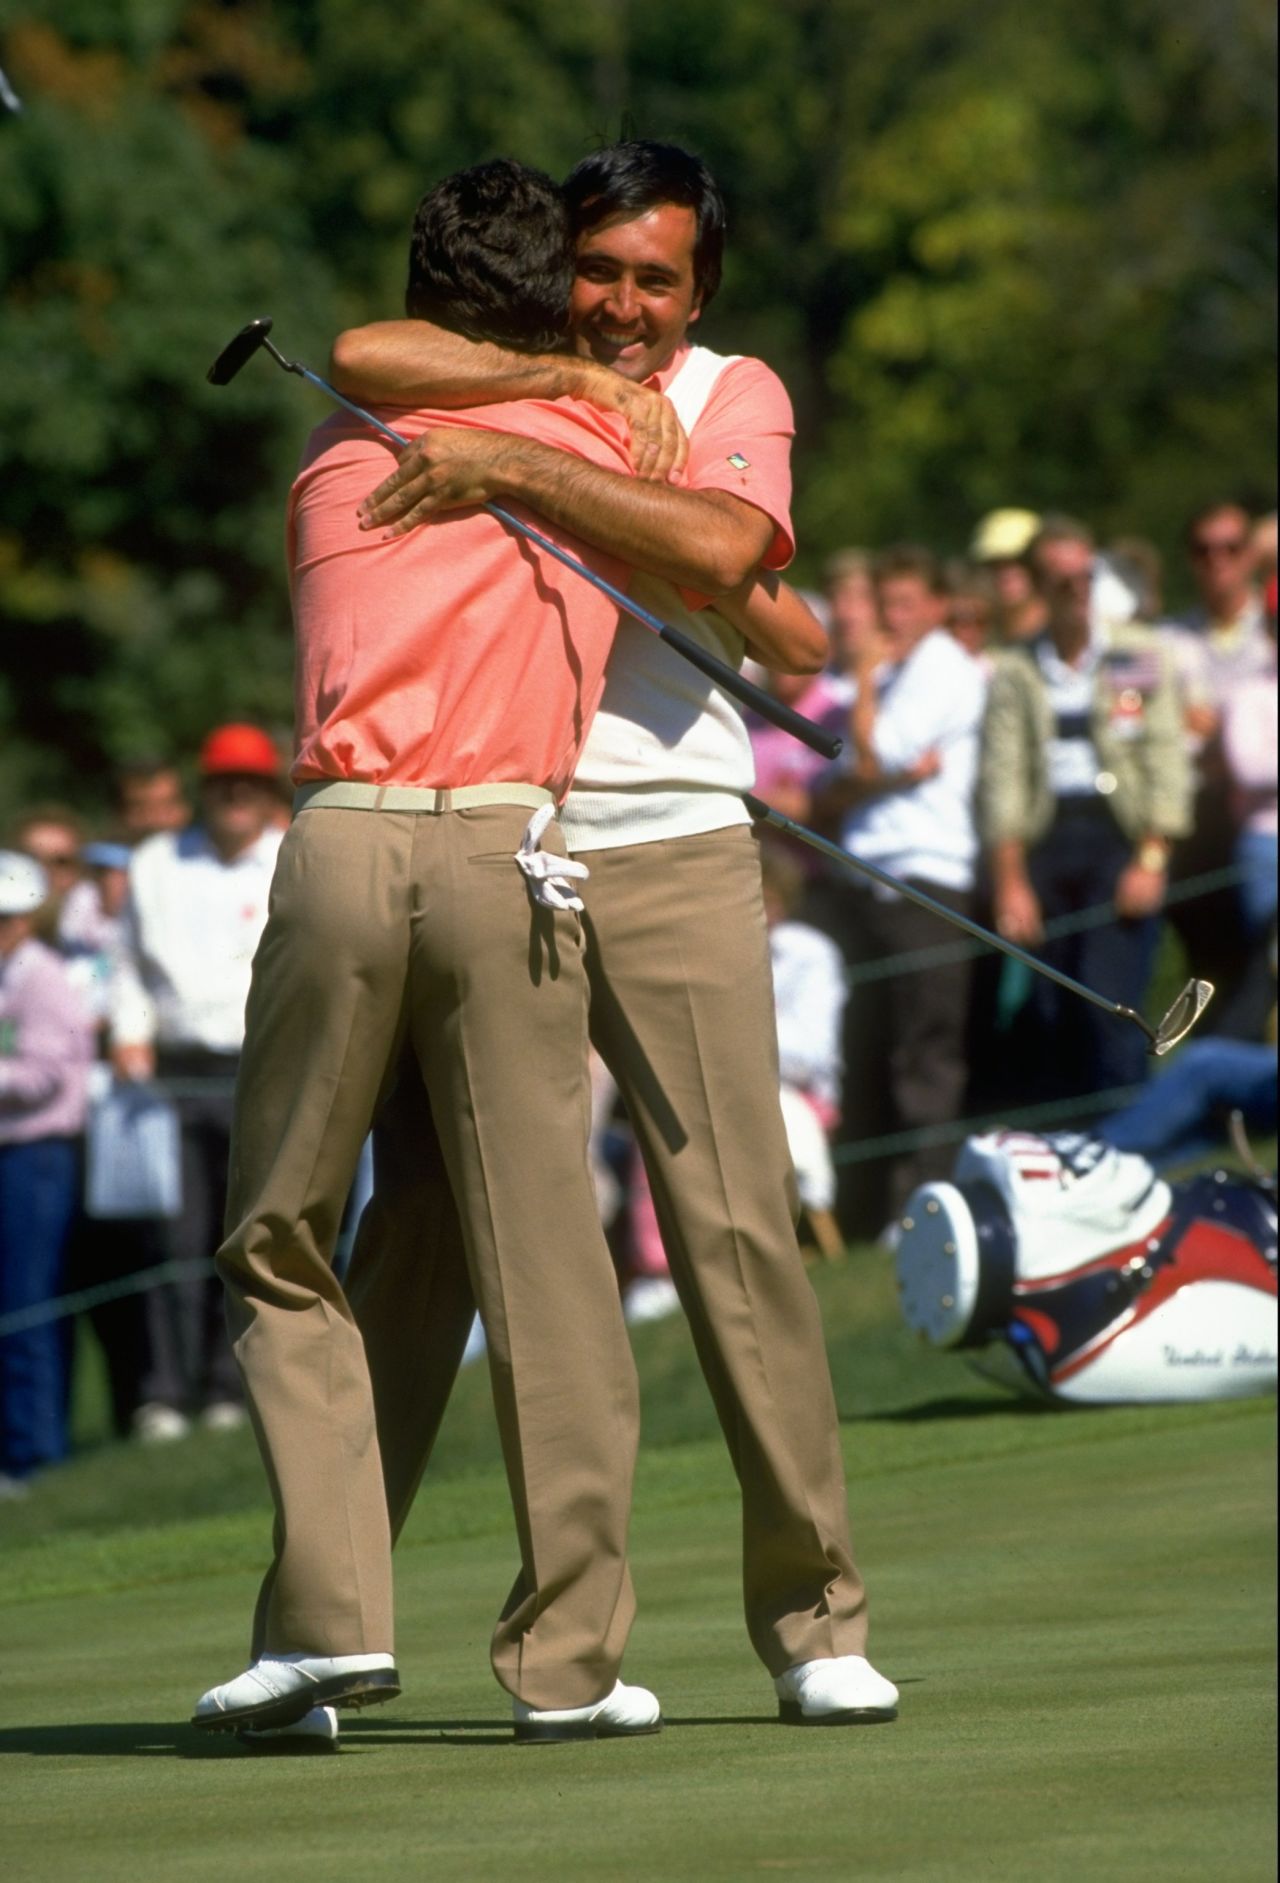 Severiano Ballestereros hugs his youthful Spanish compatriot Jose Maria Olazabal as their incredible partnership got underway during the 1987 match at Muirfield Village.